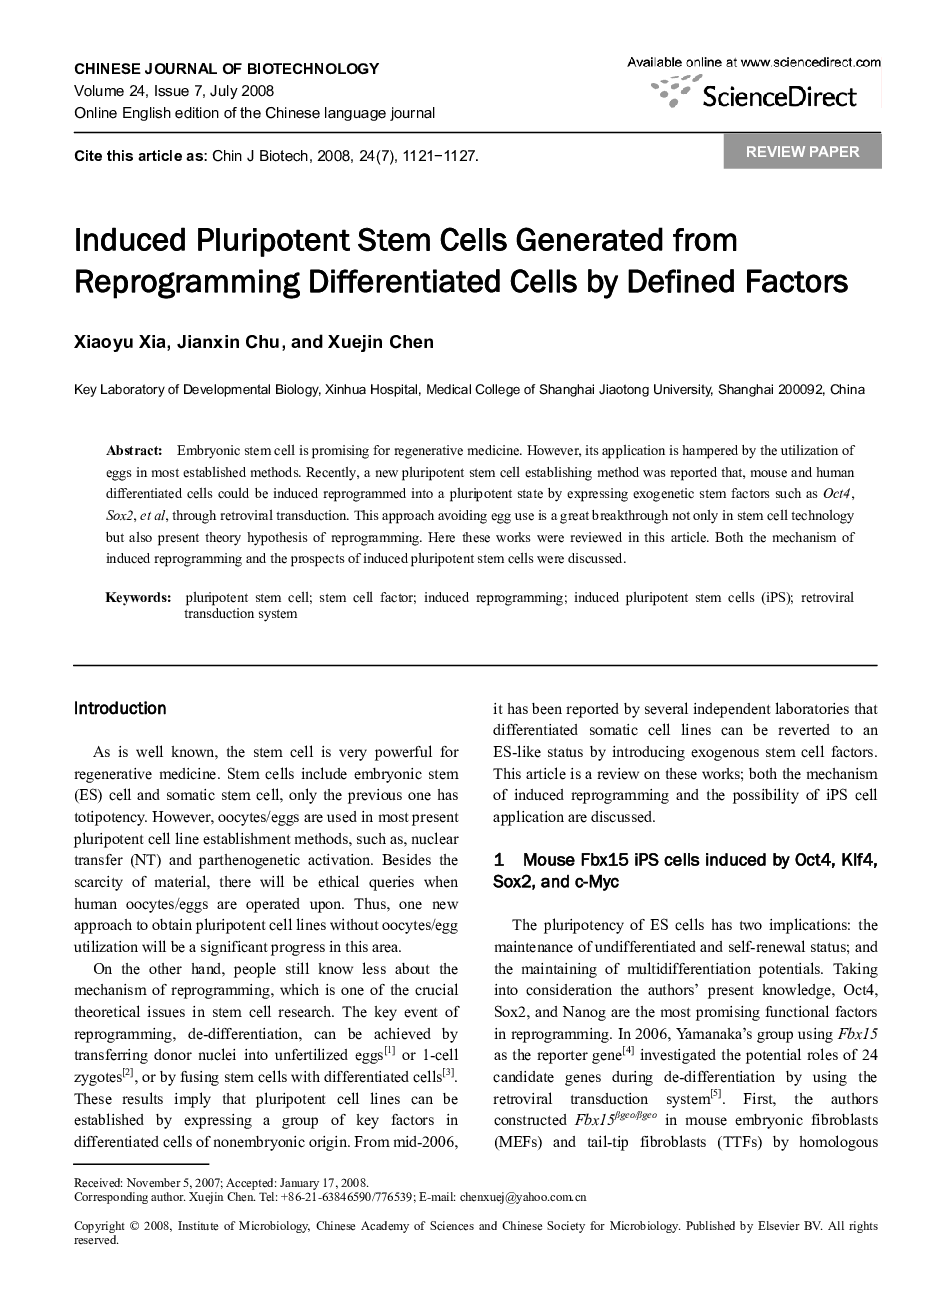 Induced Pluripotent Stem Cells Generated from Reprogramming Differentiated Cells by Defined Factors